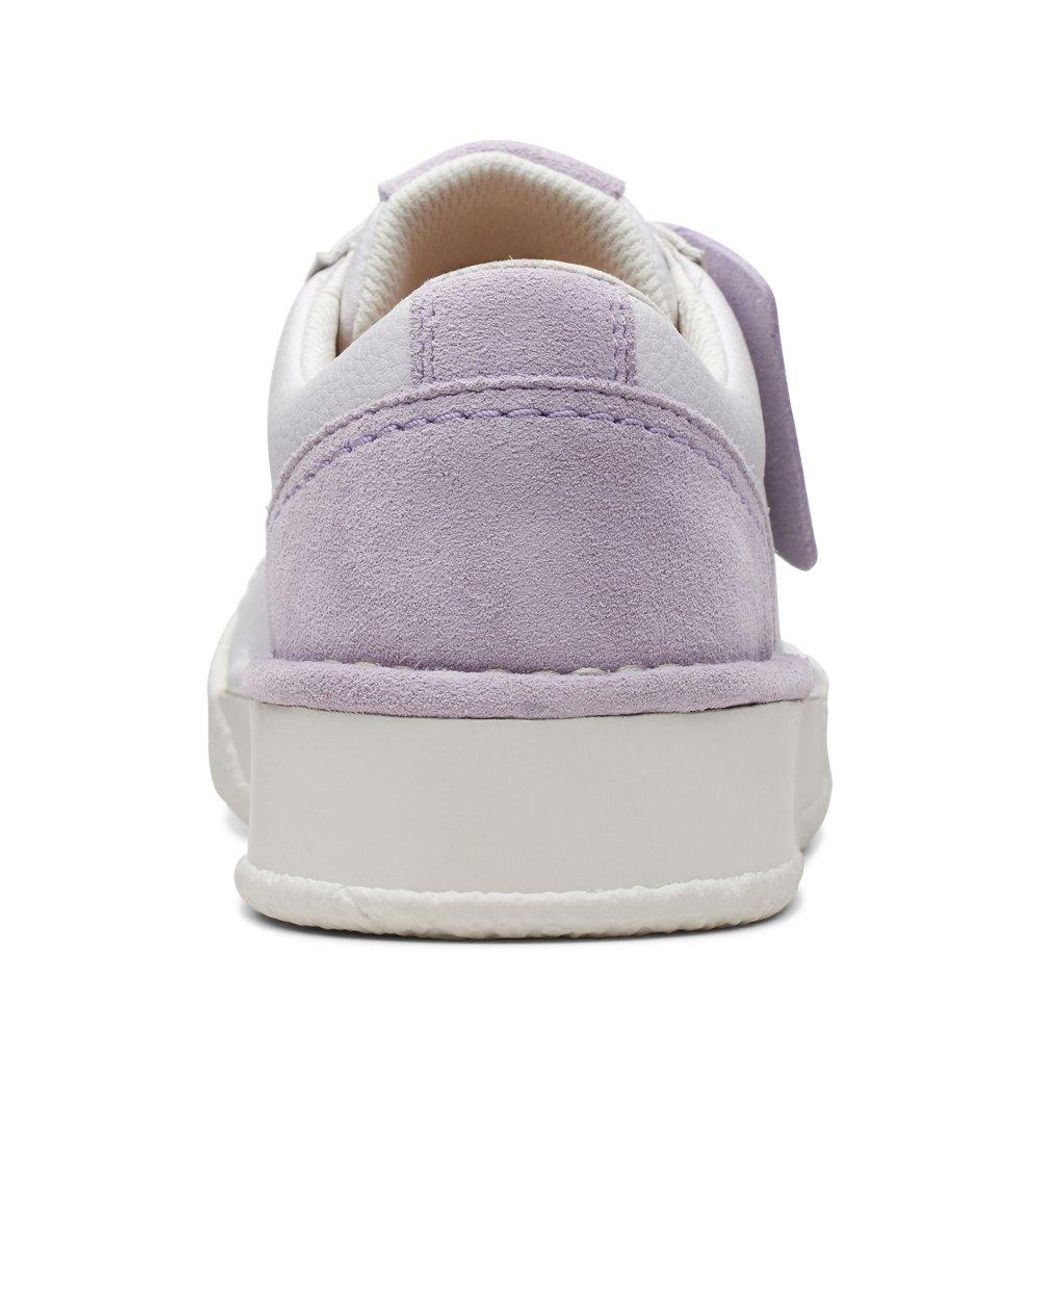 Clarks Craft Cup Walk Trainers in White | Lyst Canada